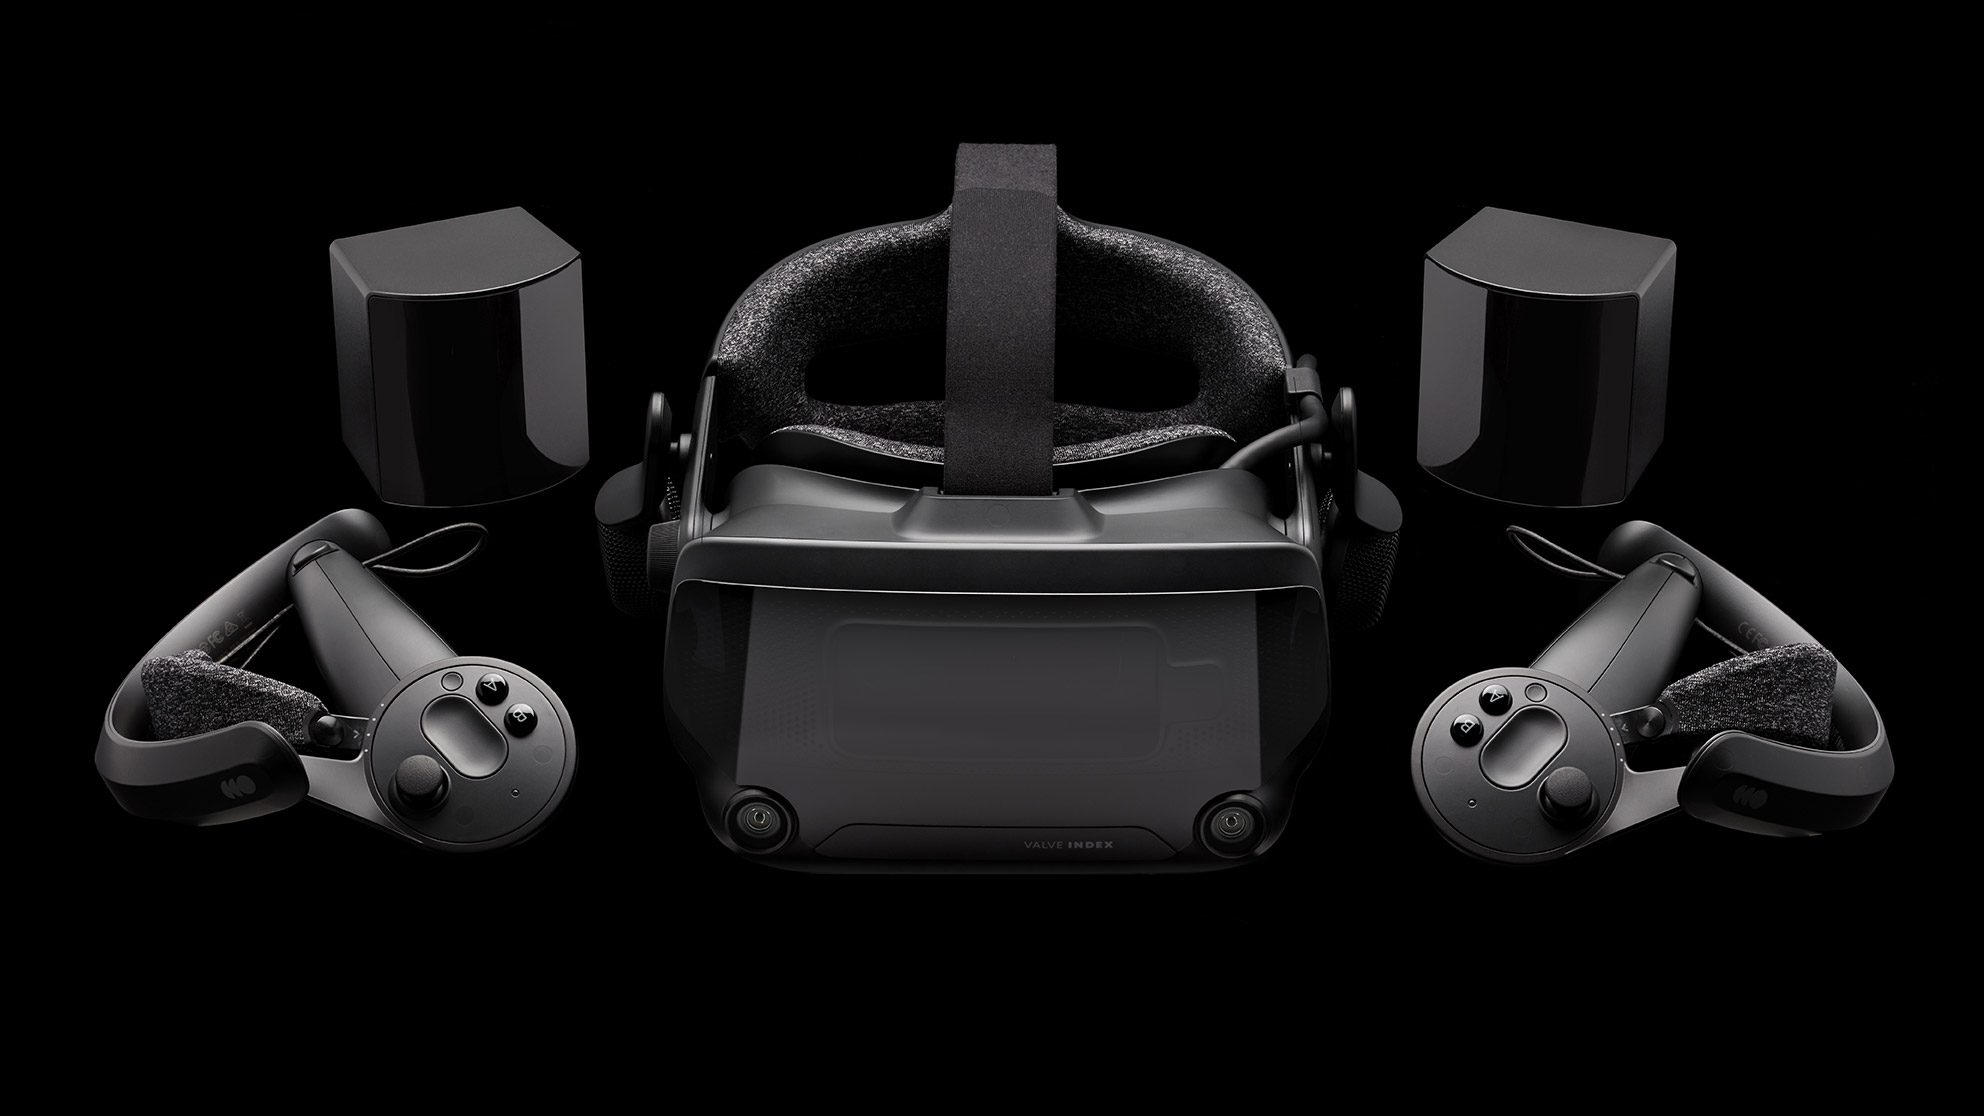 Guide: Check if is Ready for Oculus, Valve, HTC)